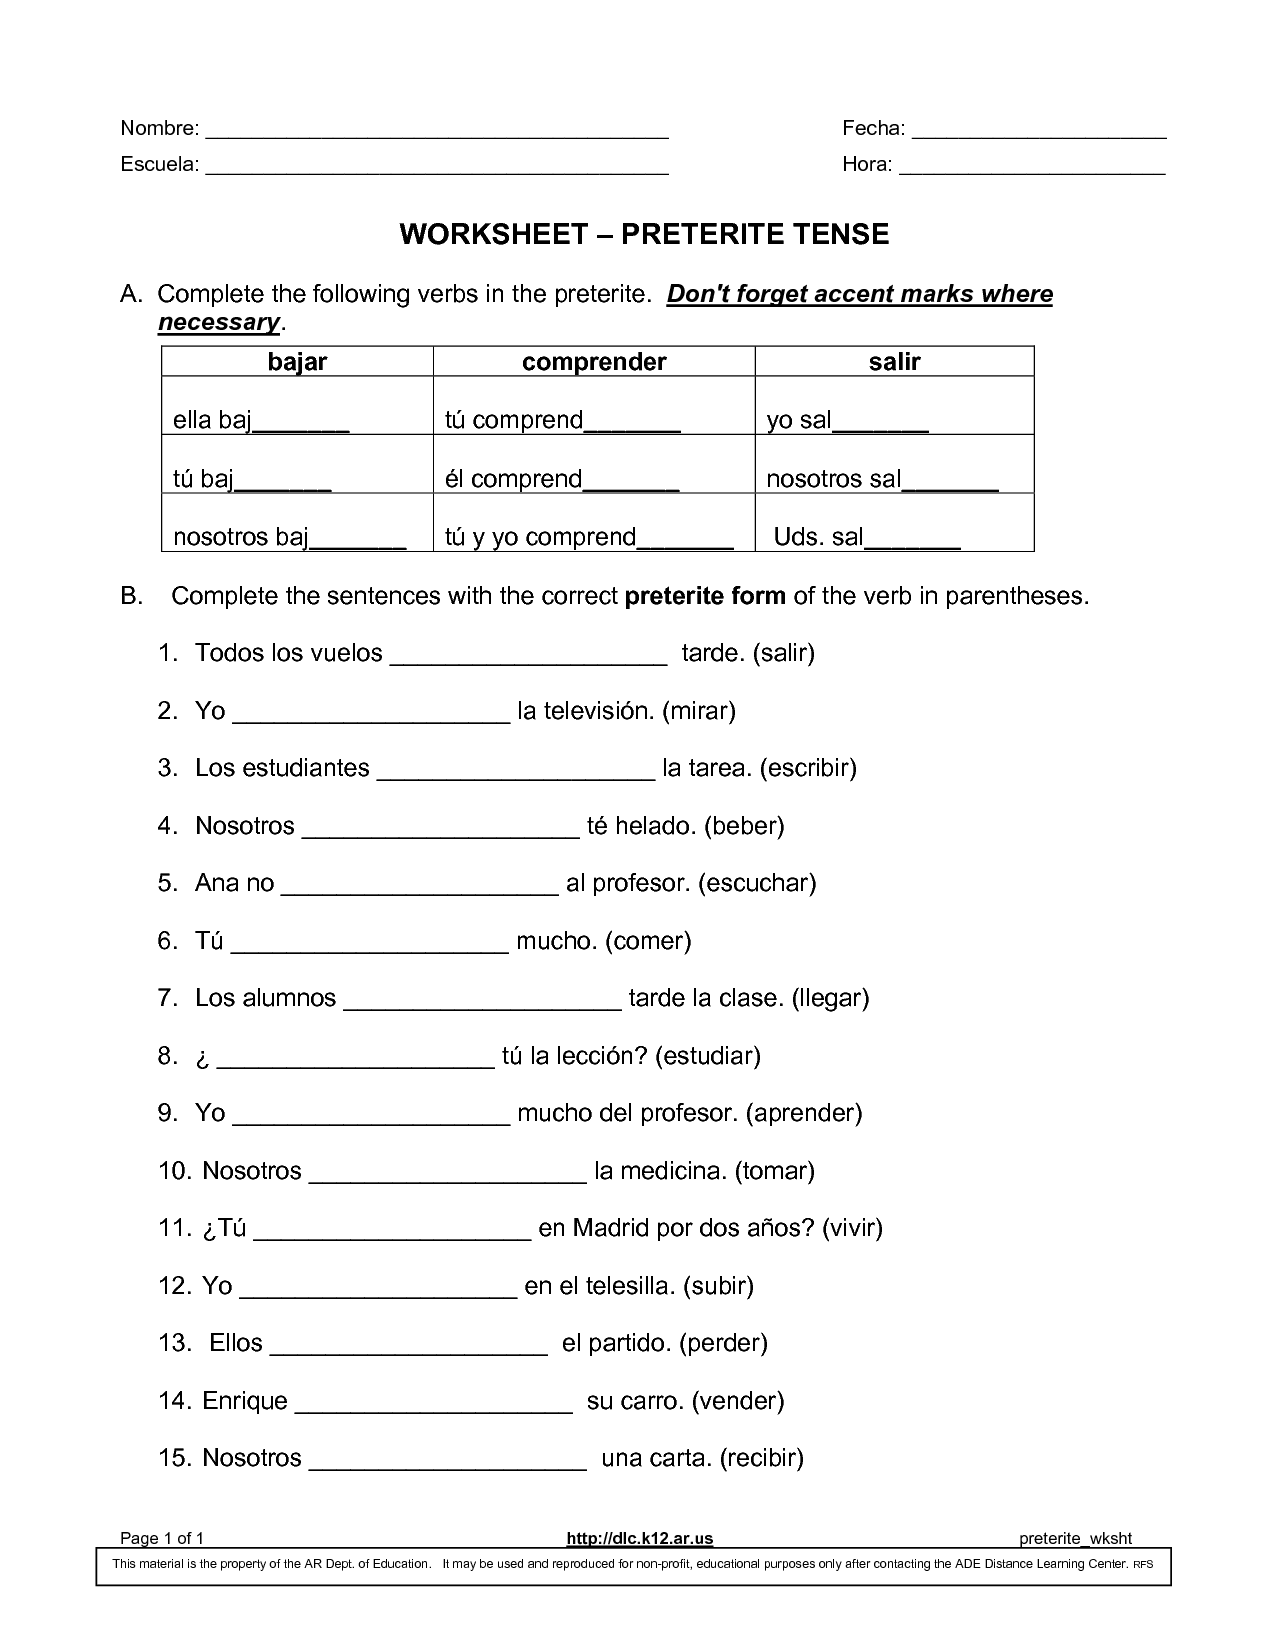 Verbs That Change Meaning In The Preterite Worksheet